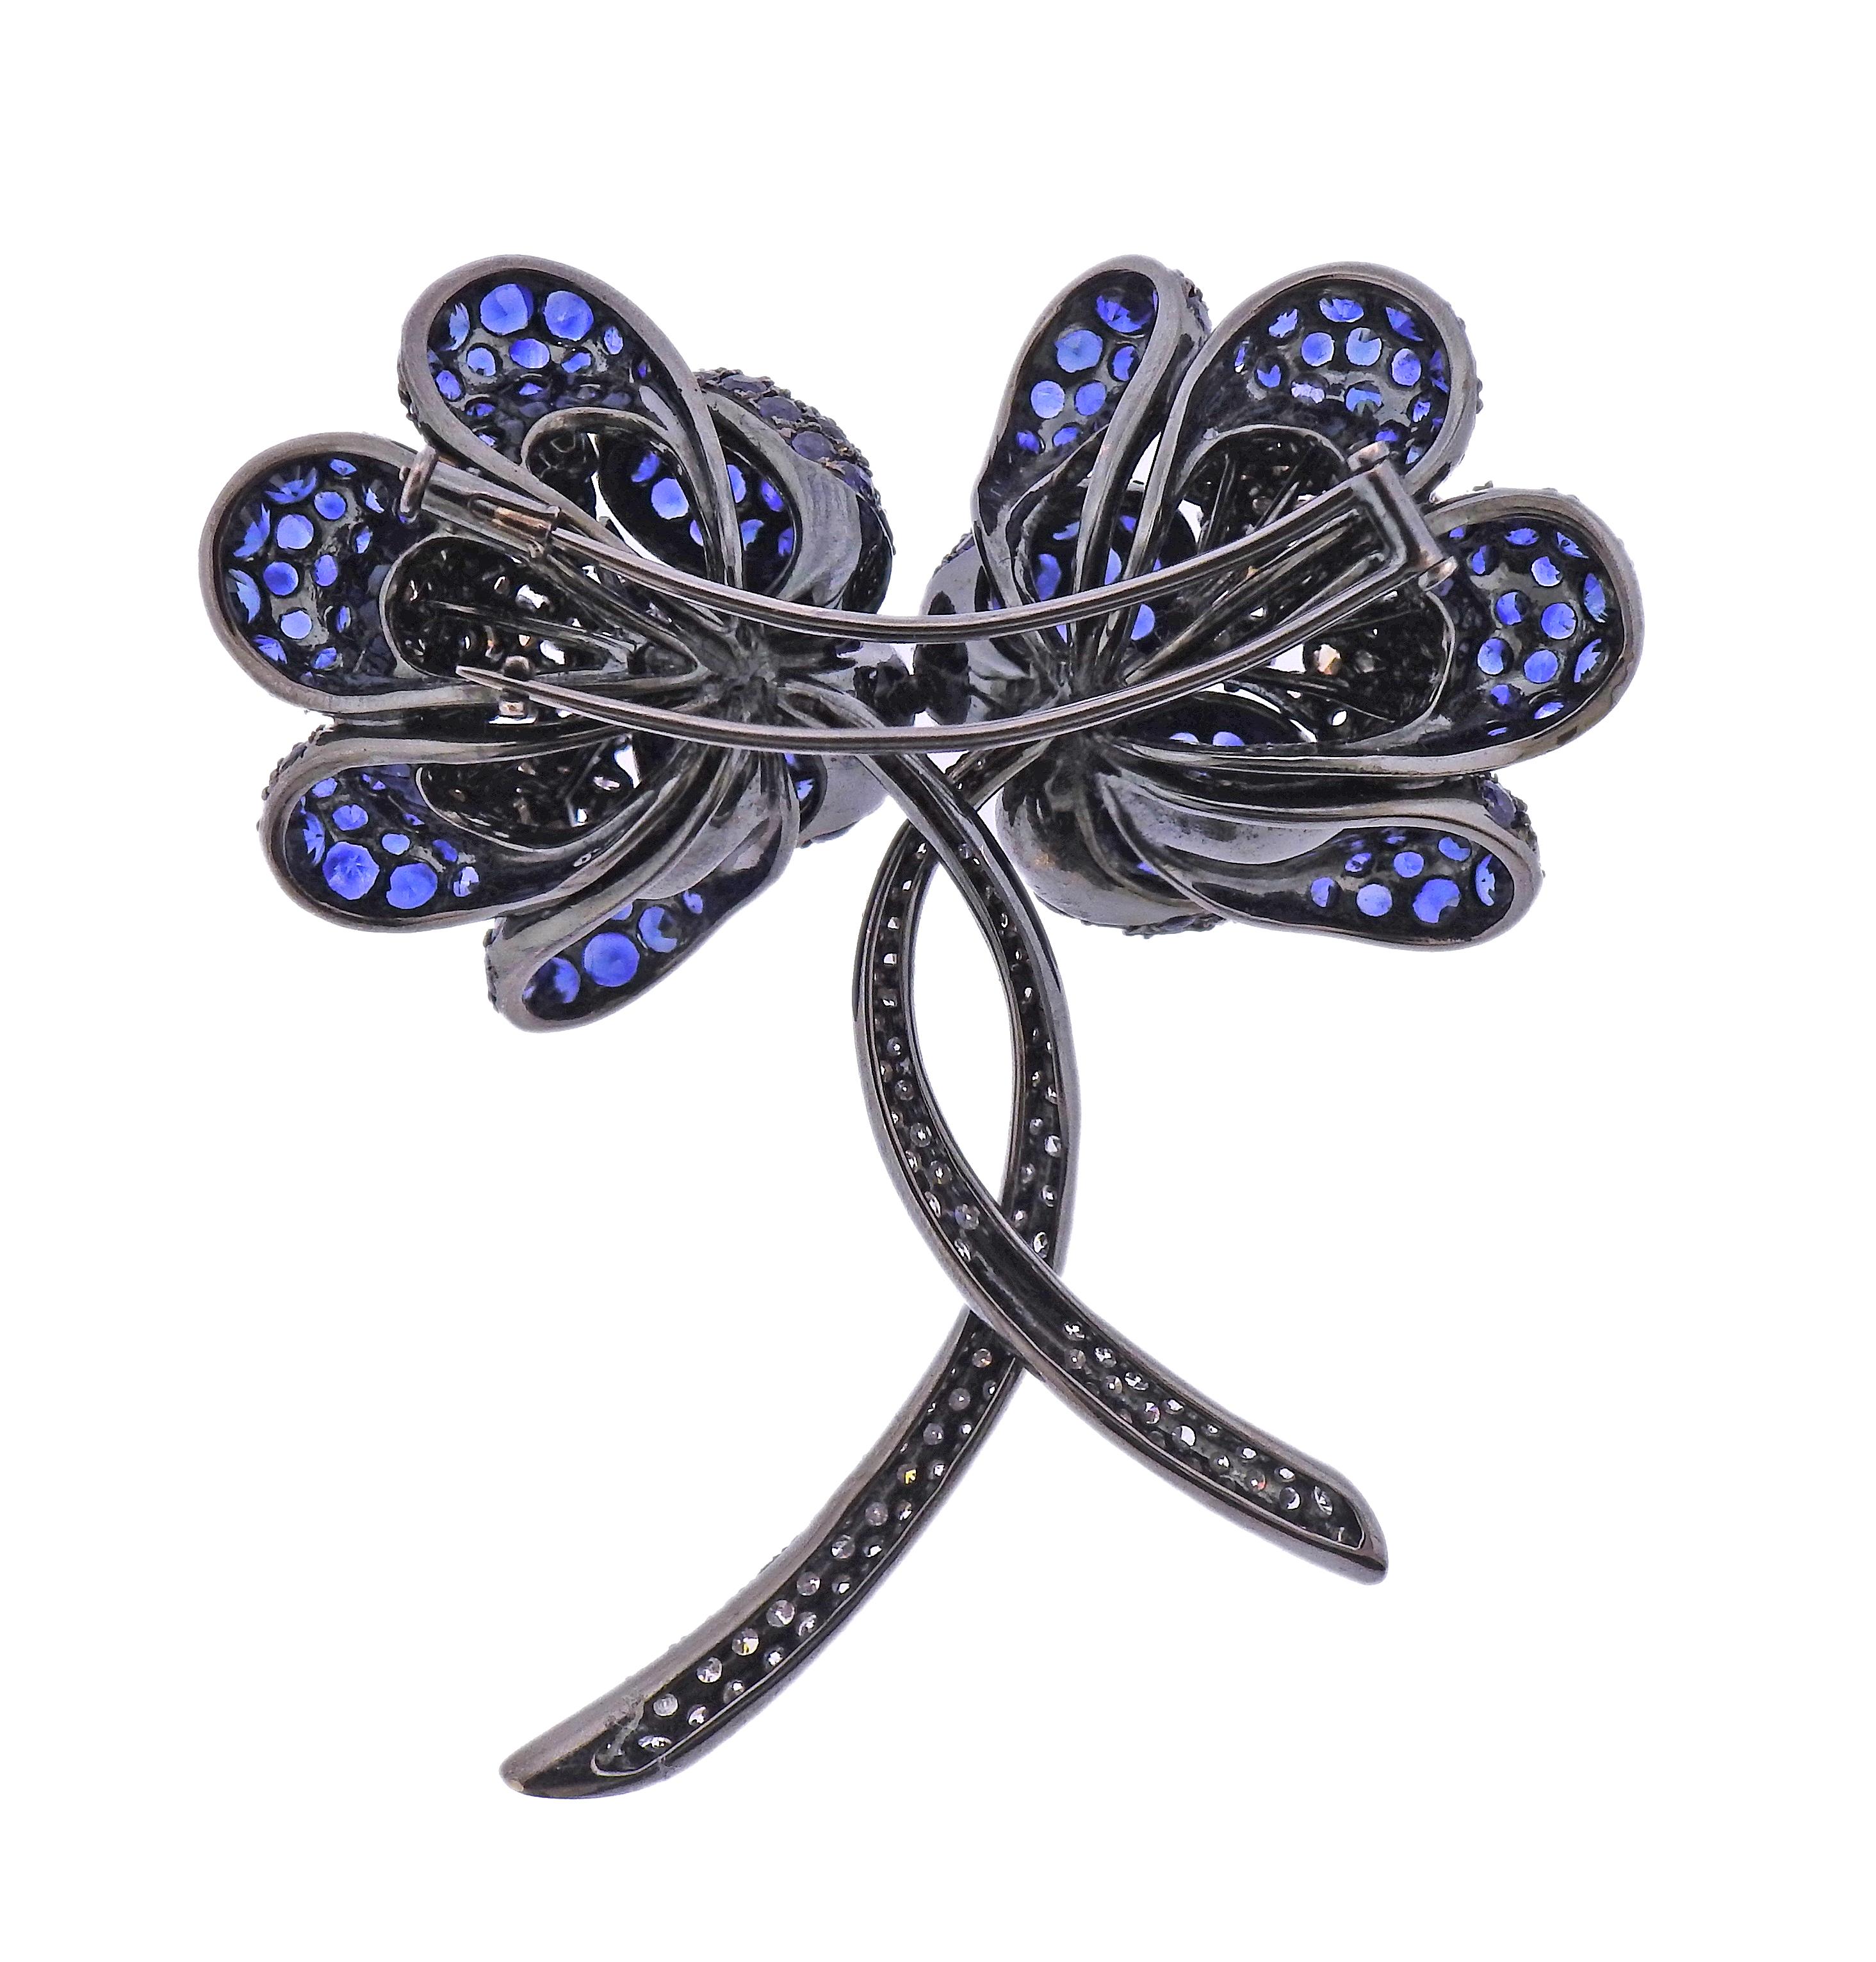 Large 18k blackened gold two flowers brooch, with blue sapphires, approx. 3.50ctw in fancy diamonds ( centers of the flowers) and approx. 1.20ctw in white diamonds (flowers stems). Brooch measures 2.5